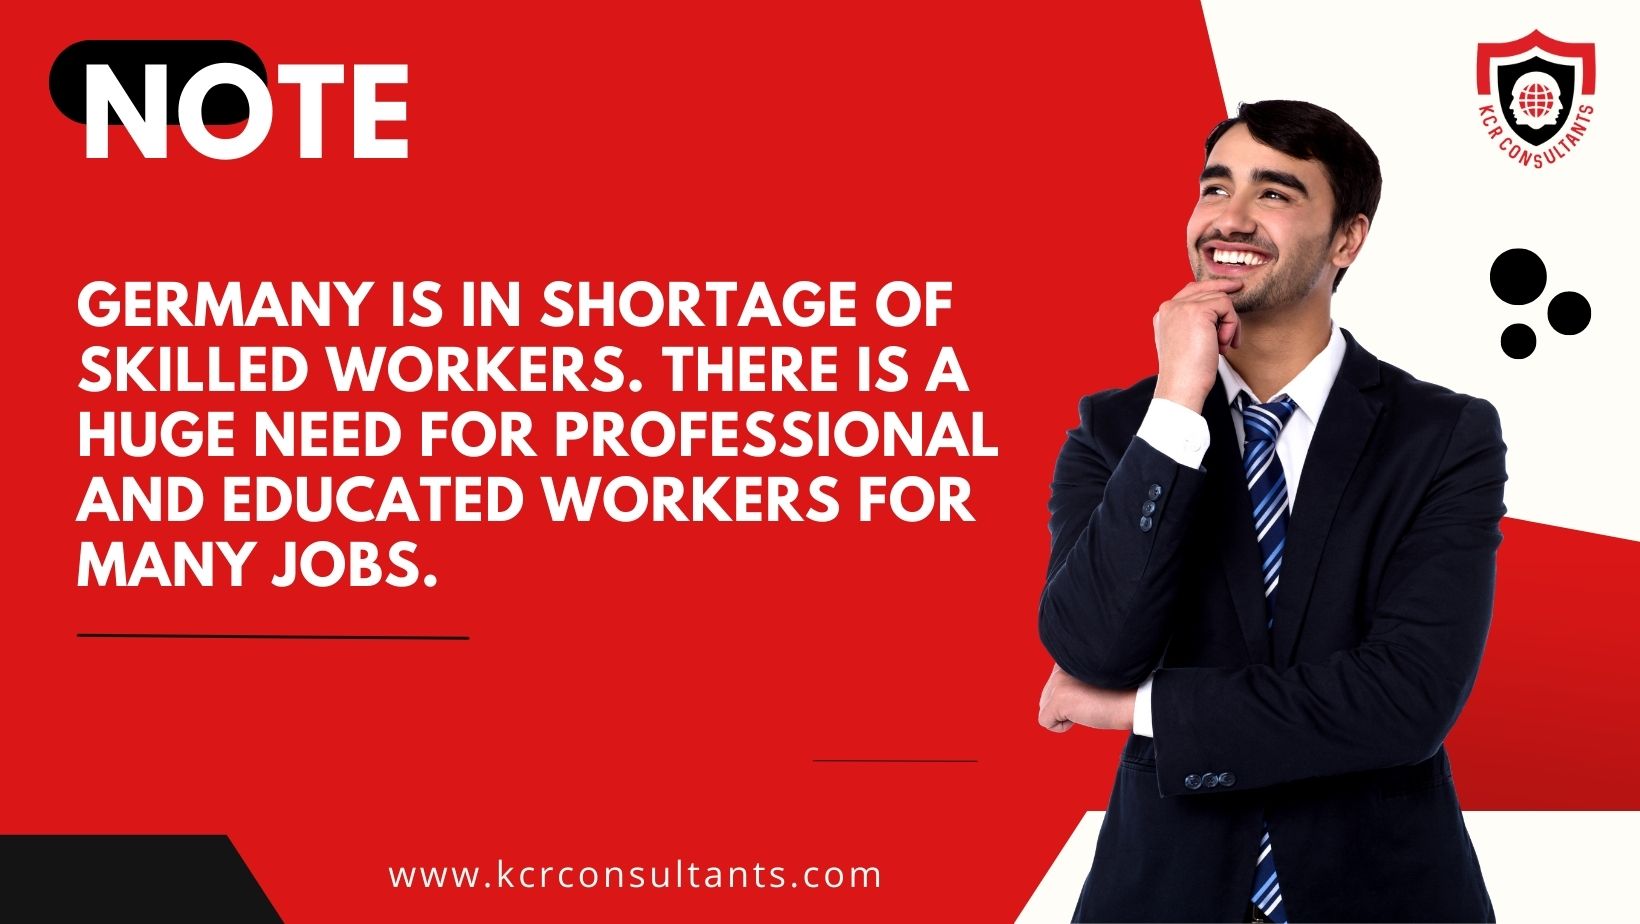 Germany is in shortage of skilled workers. There is a huge need for professional and educated workers for many jobs.- KCR CONSULTANTS